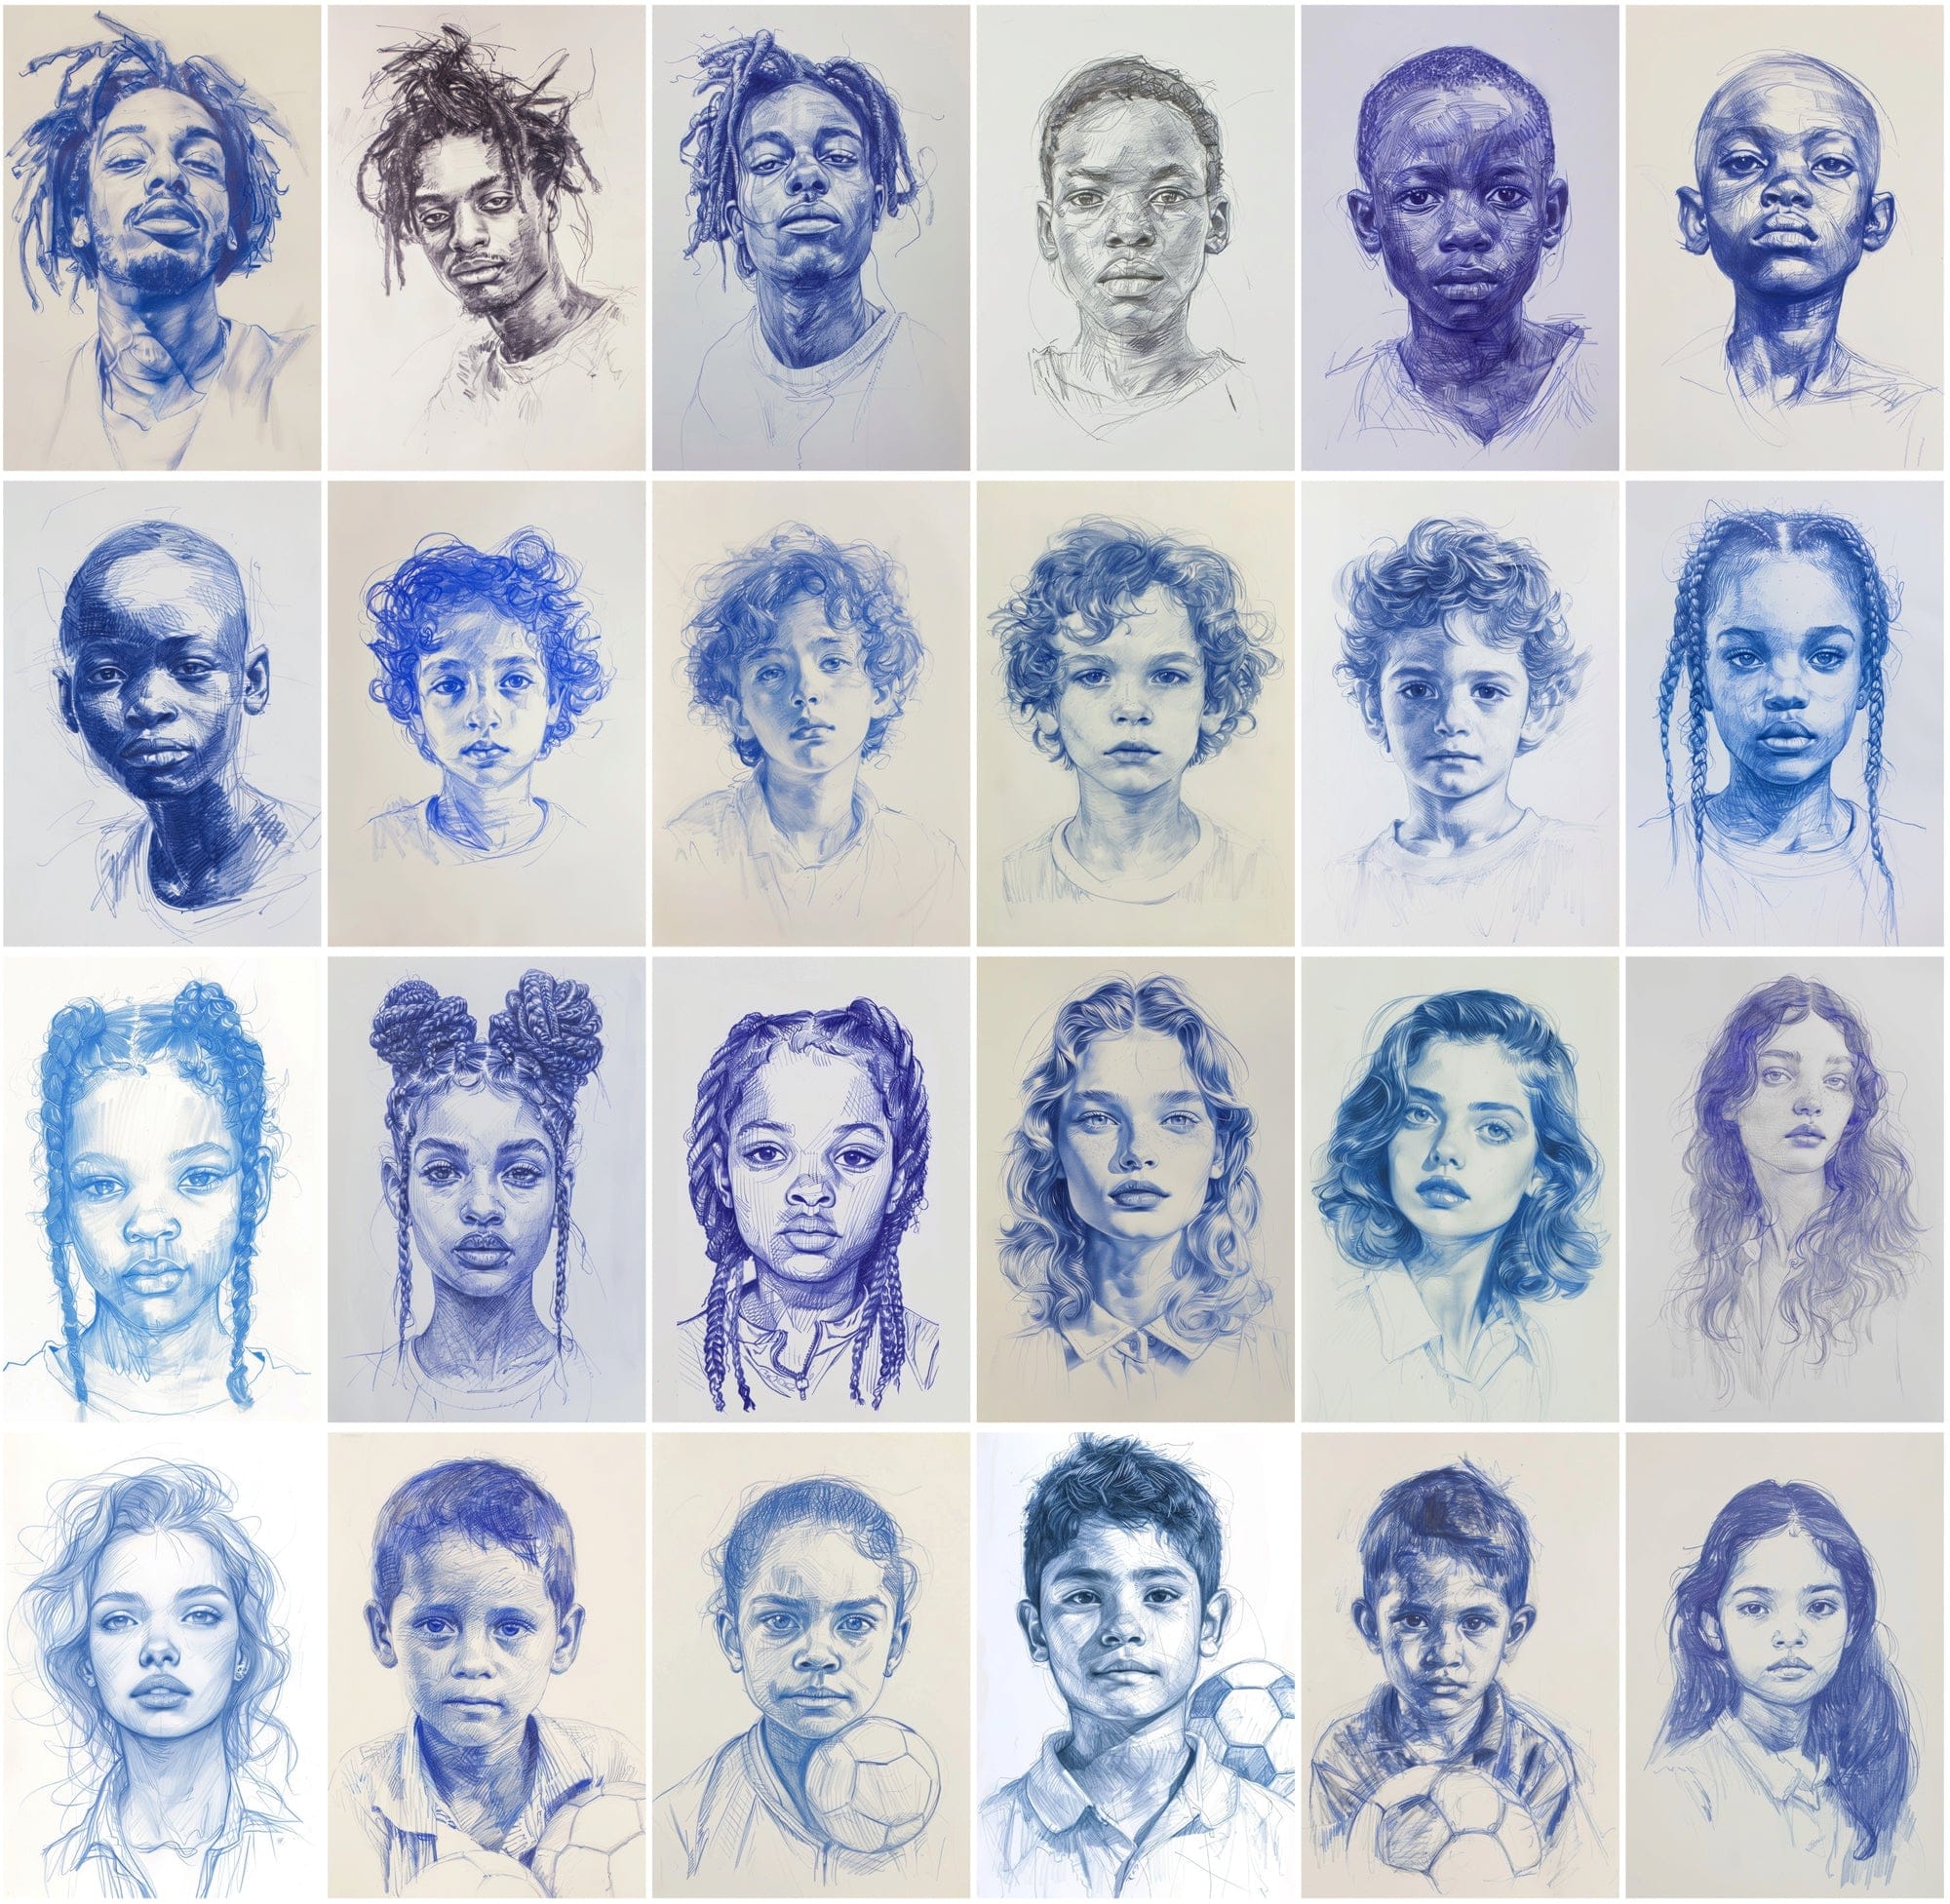 Diverse Global Portraits Collection: Pencil Sketches of People from Various Cultures Digital Download Sumobundle